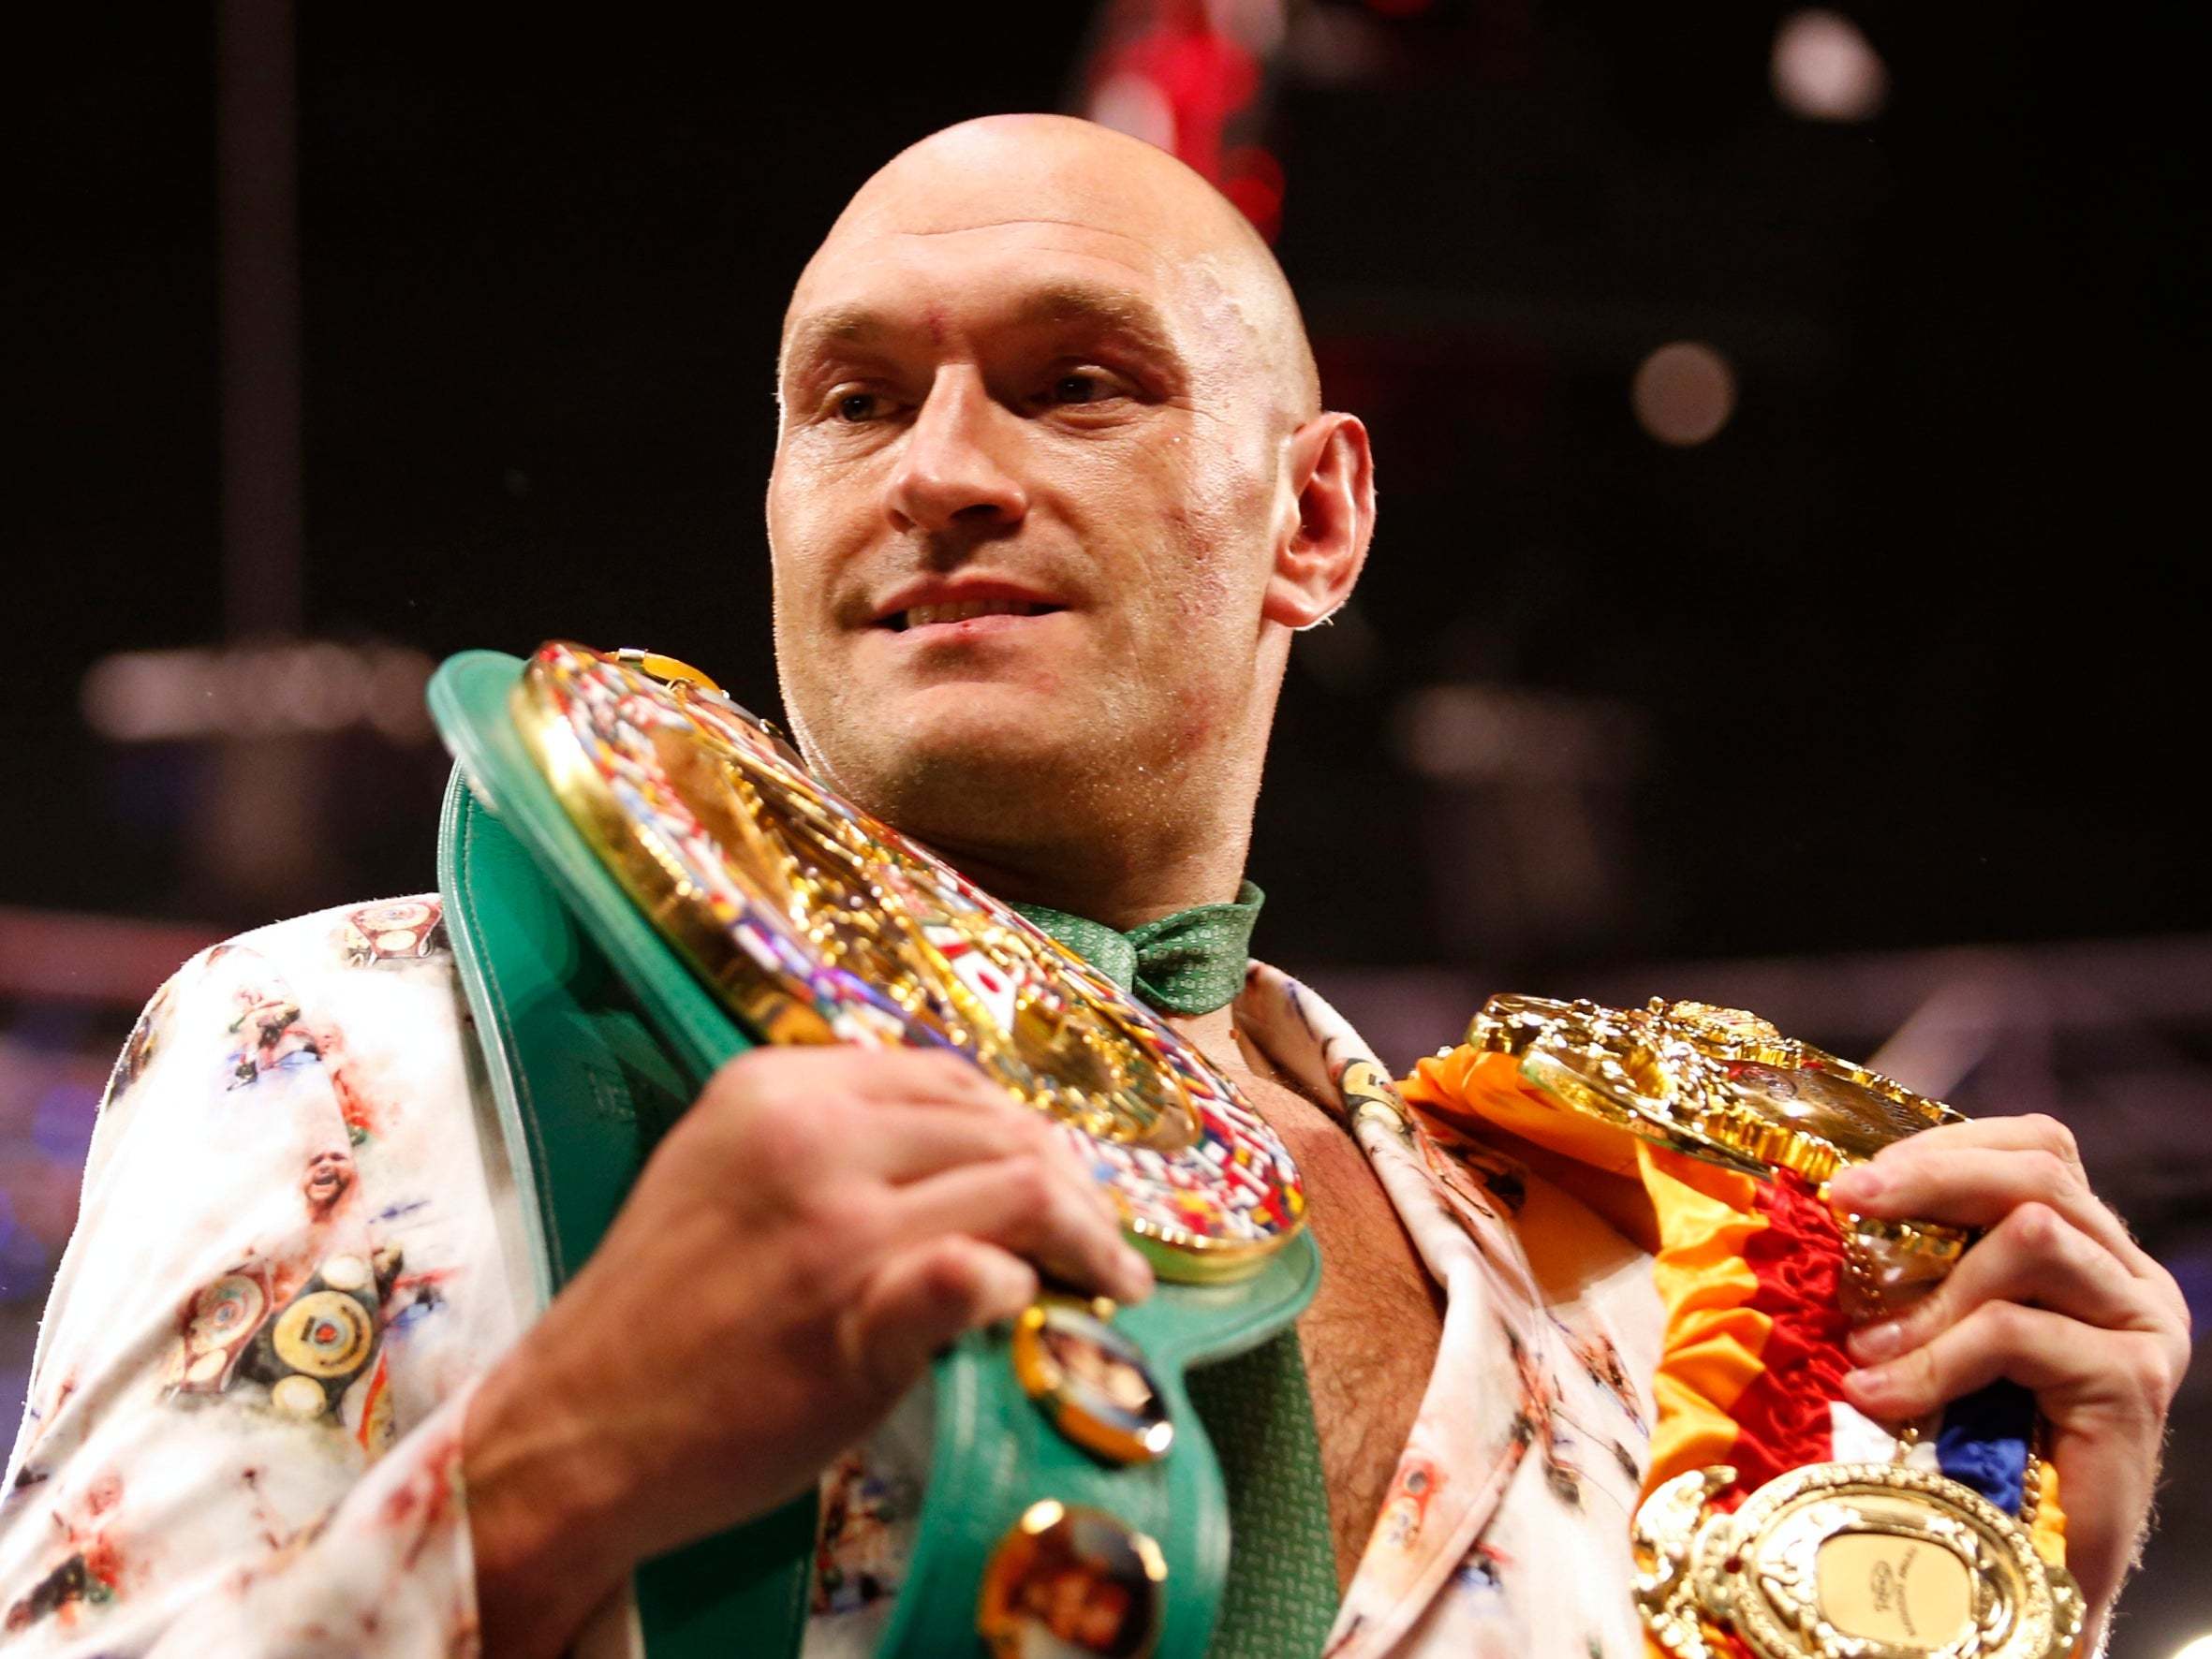 The so-called Gypsy King celebrates his latest victory